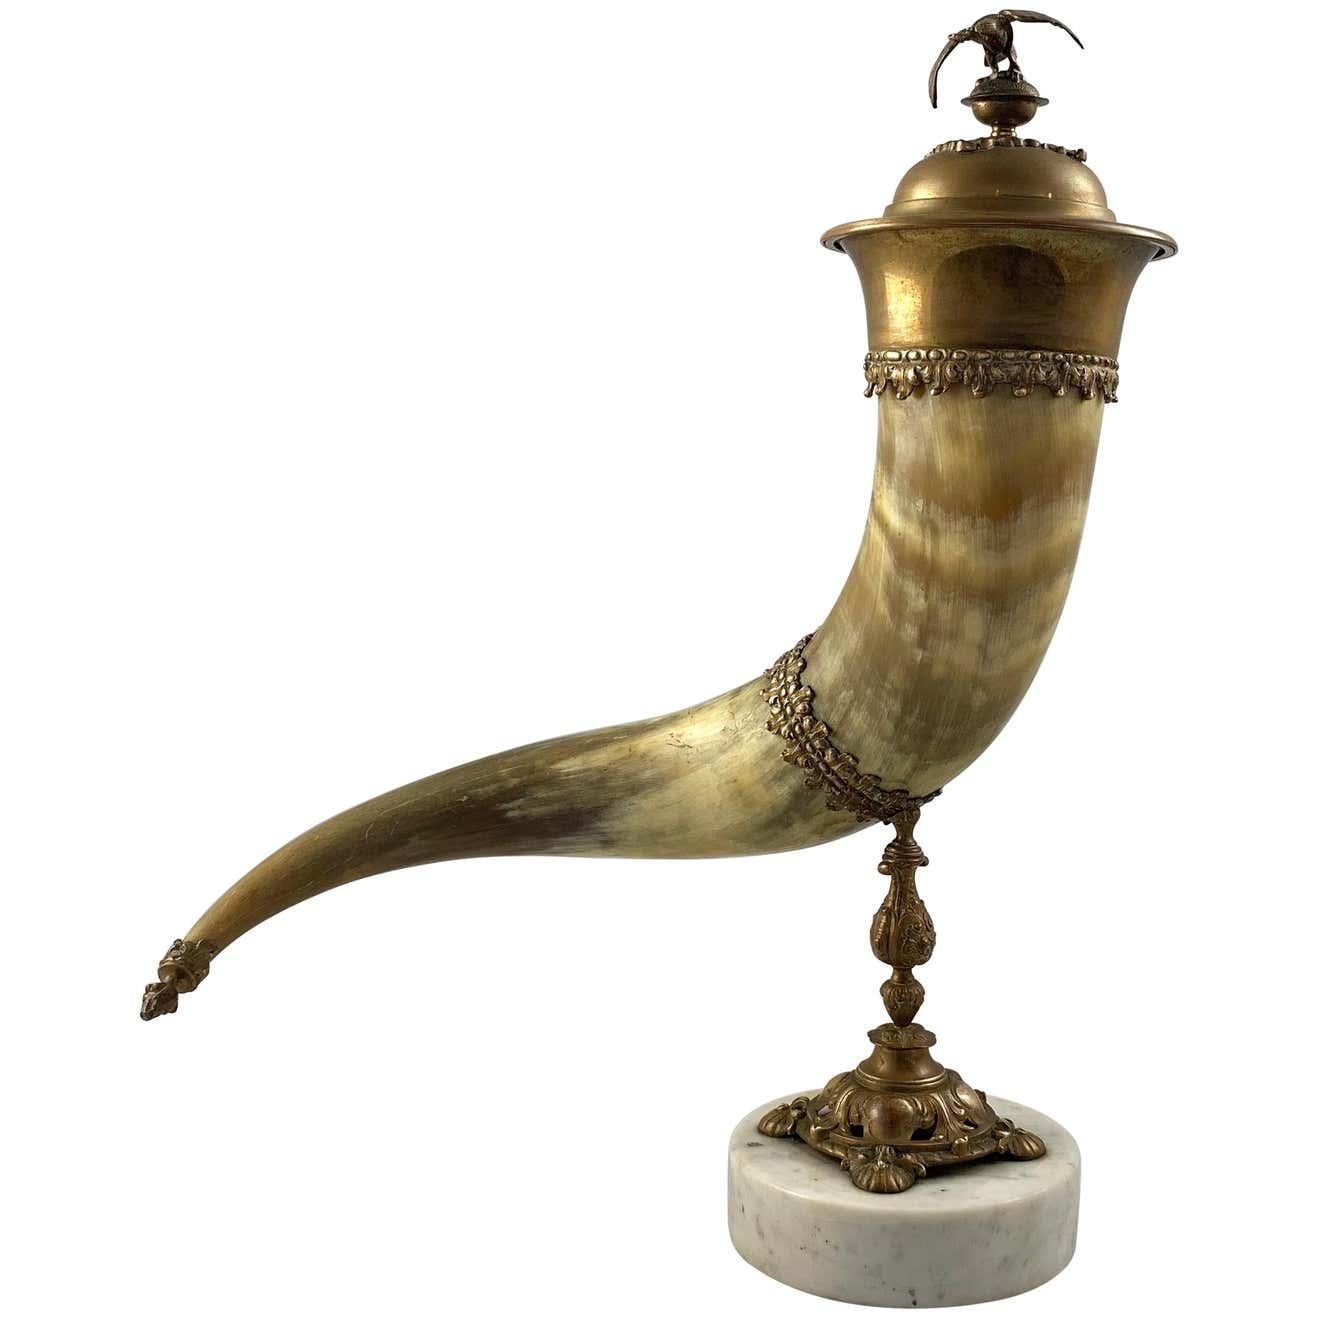 A fine horn and gilt brass mounted Cornucopia with cover.

19th century.

Supported on a cast stand on a square base.